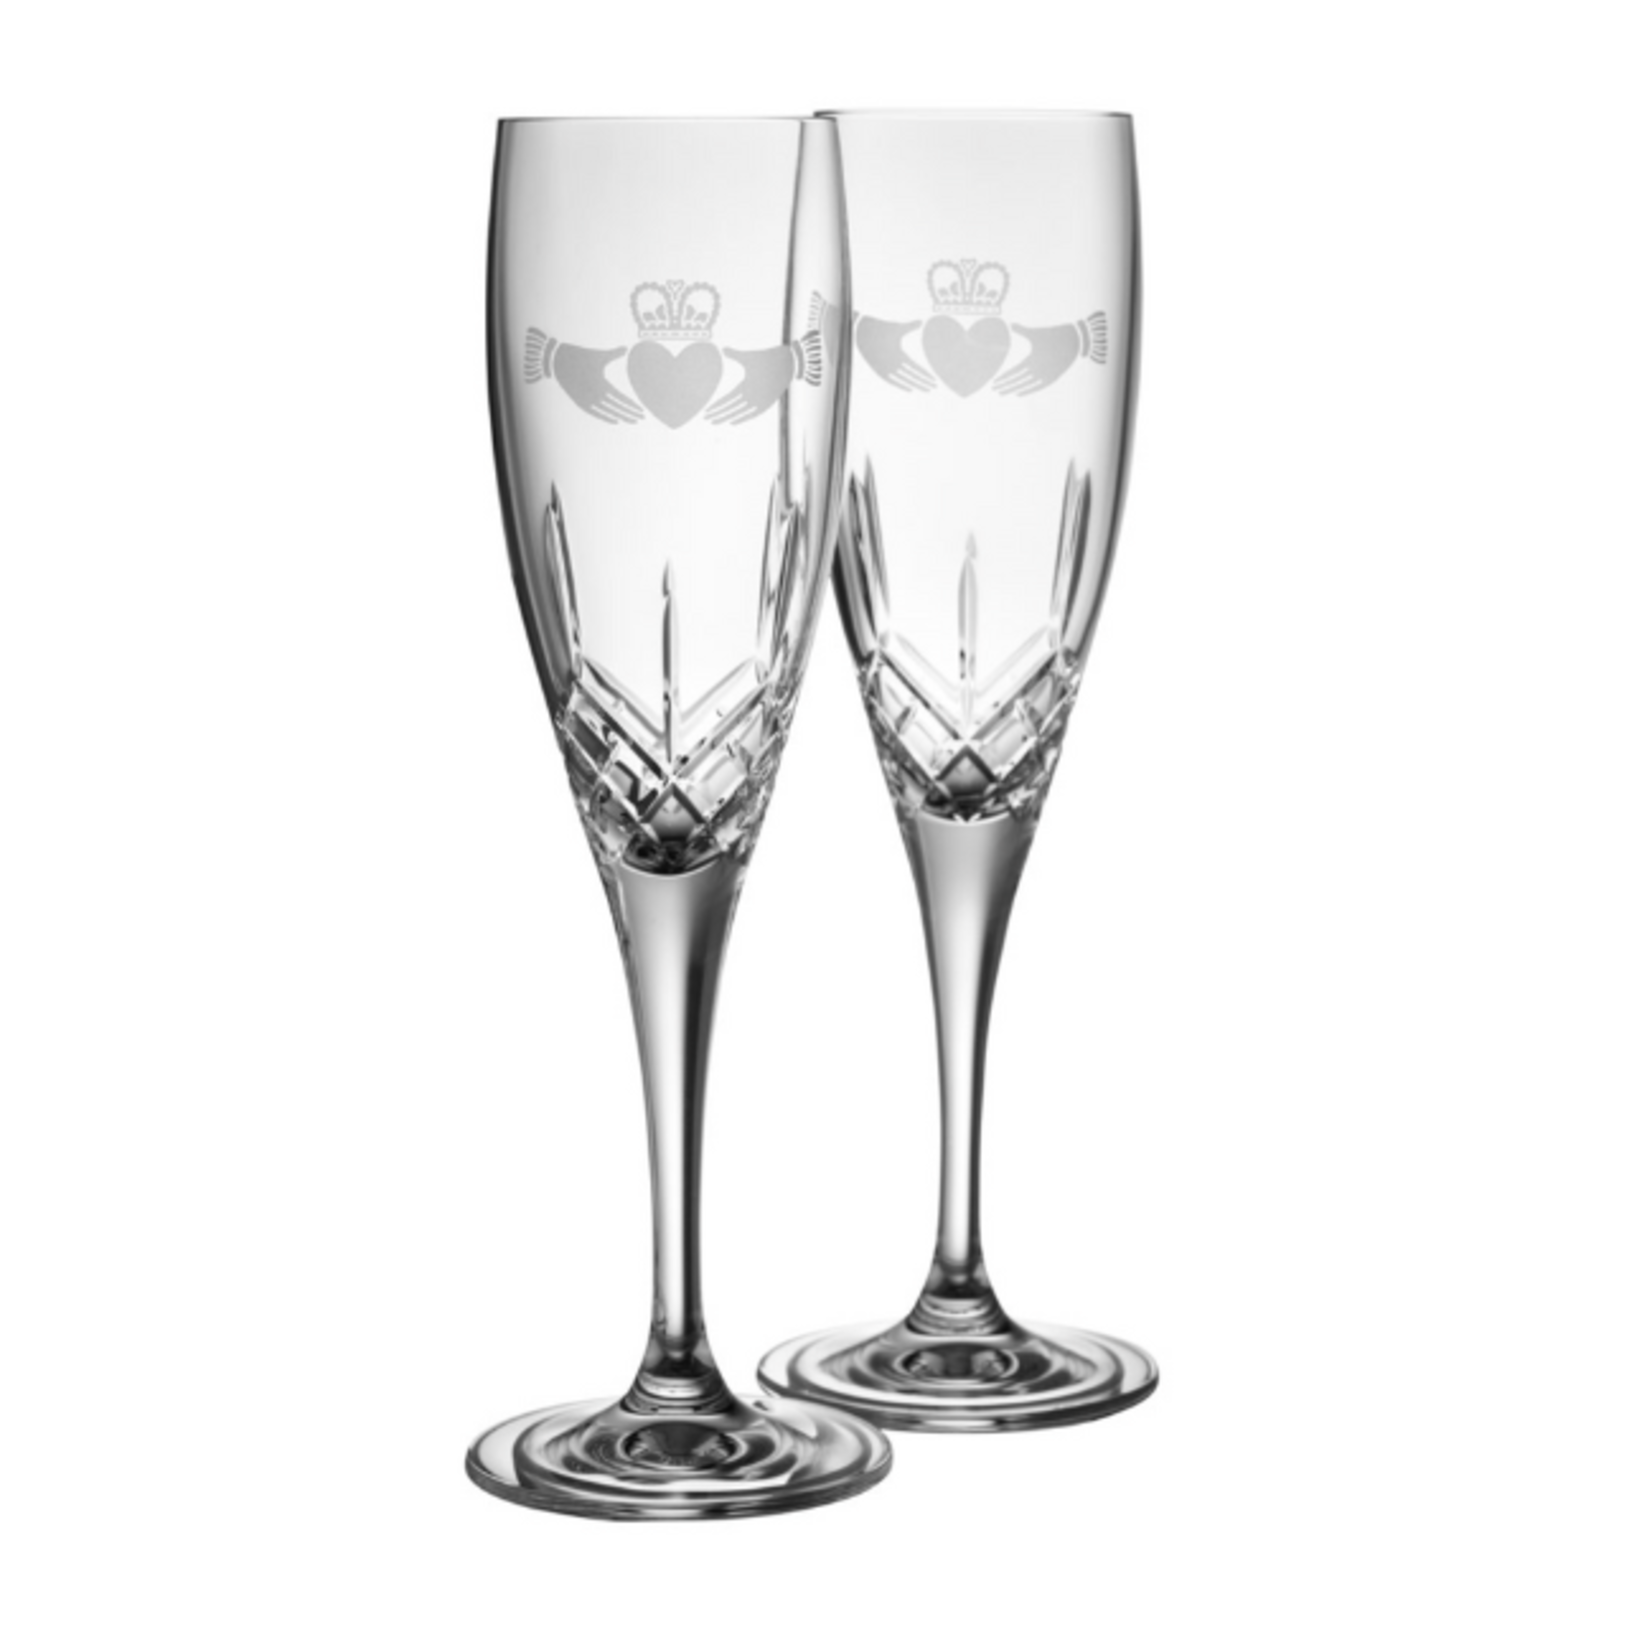 Galway Crystal Galway Crystal Claddagh Champagne Flute Pair